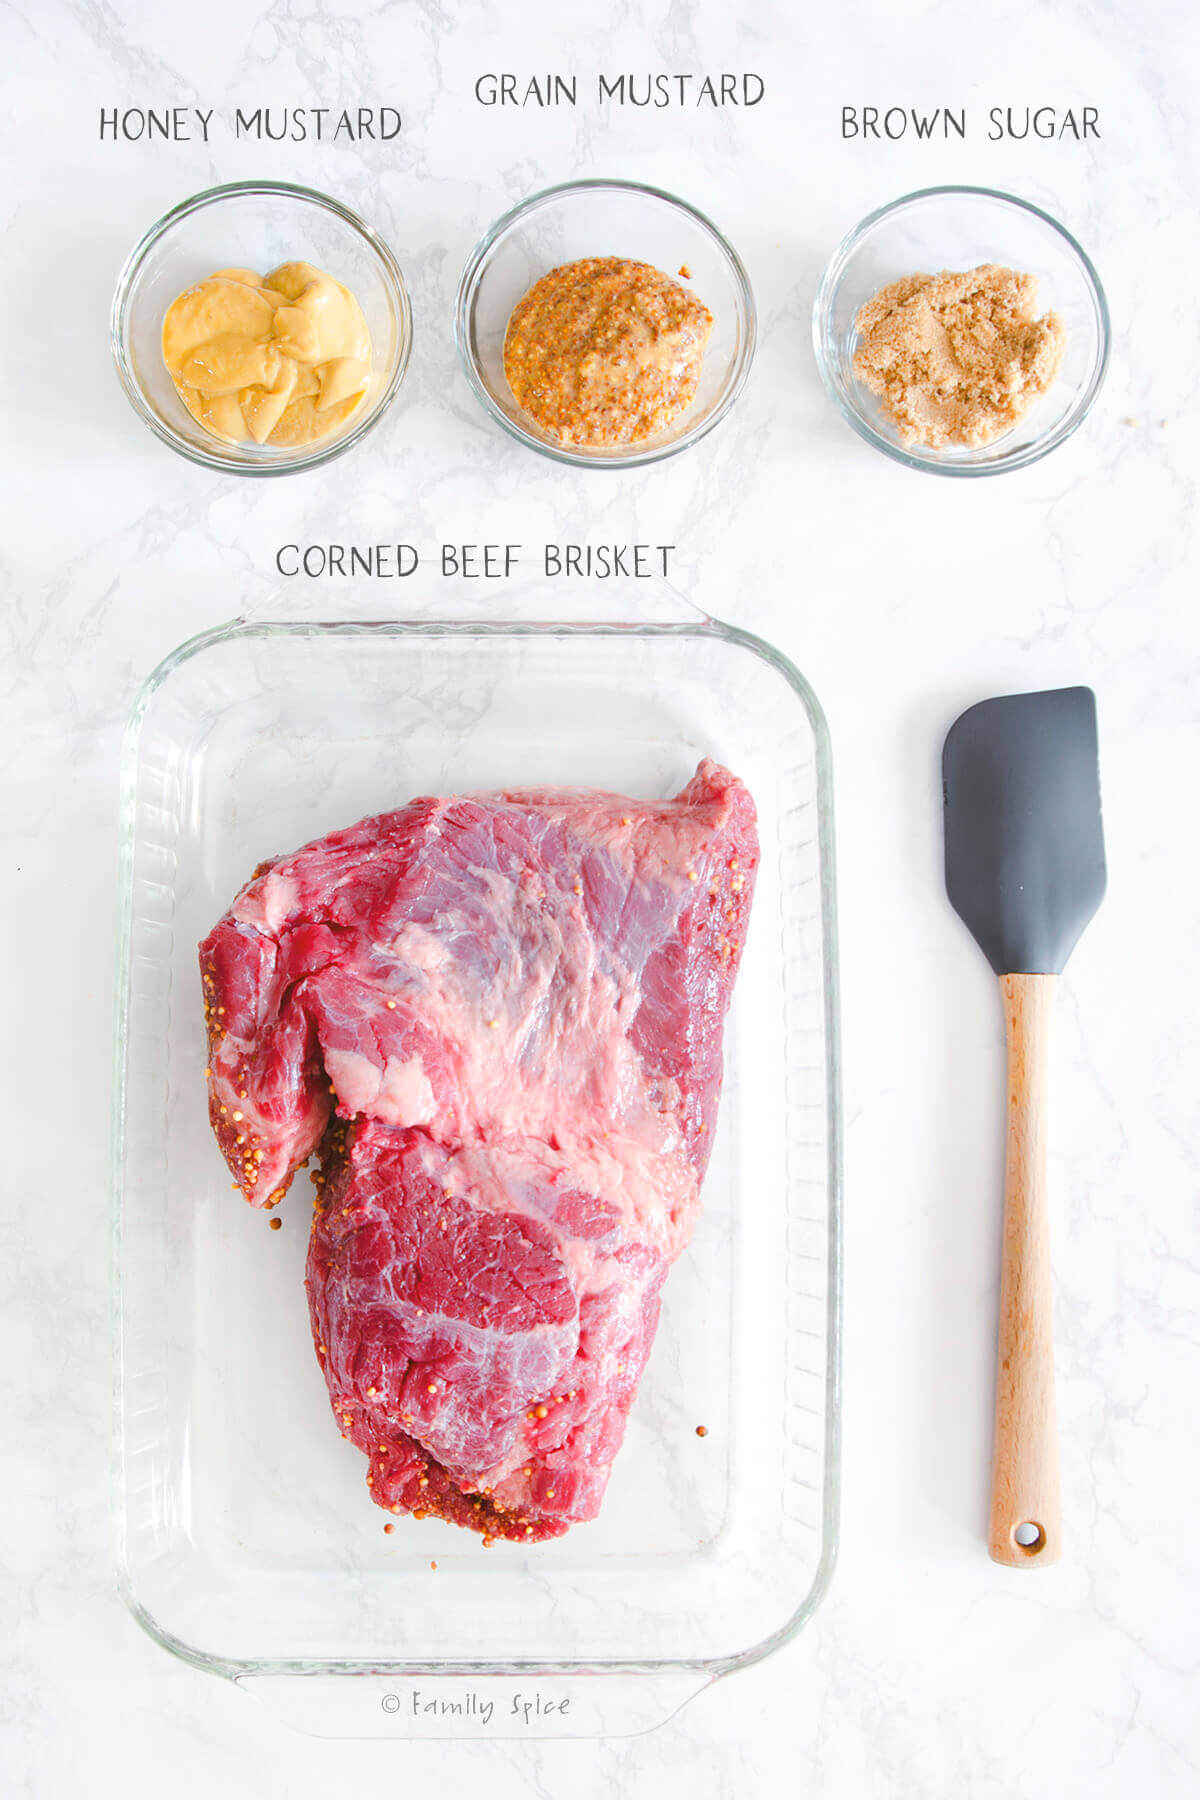 Ingredients labeled and needed for baked corned beef with mustard